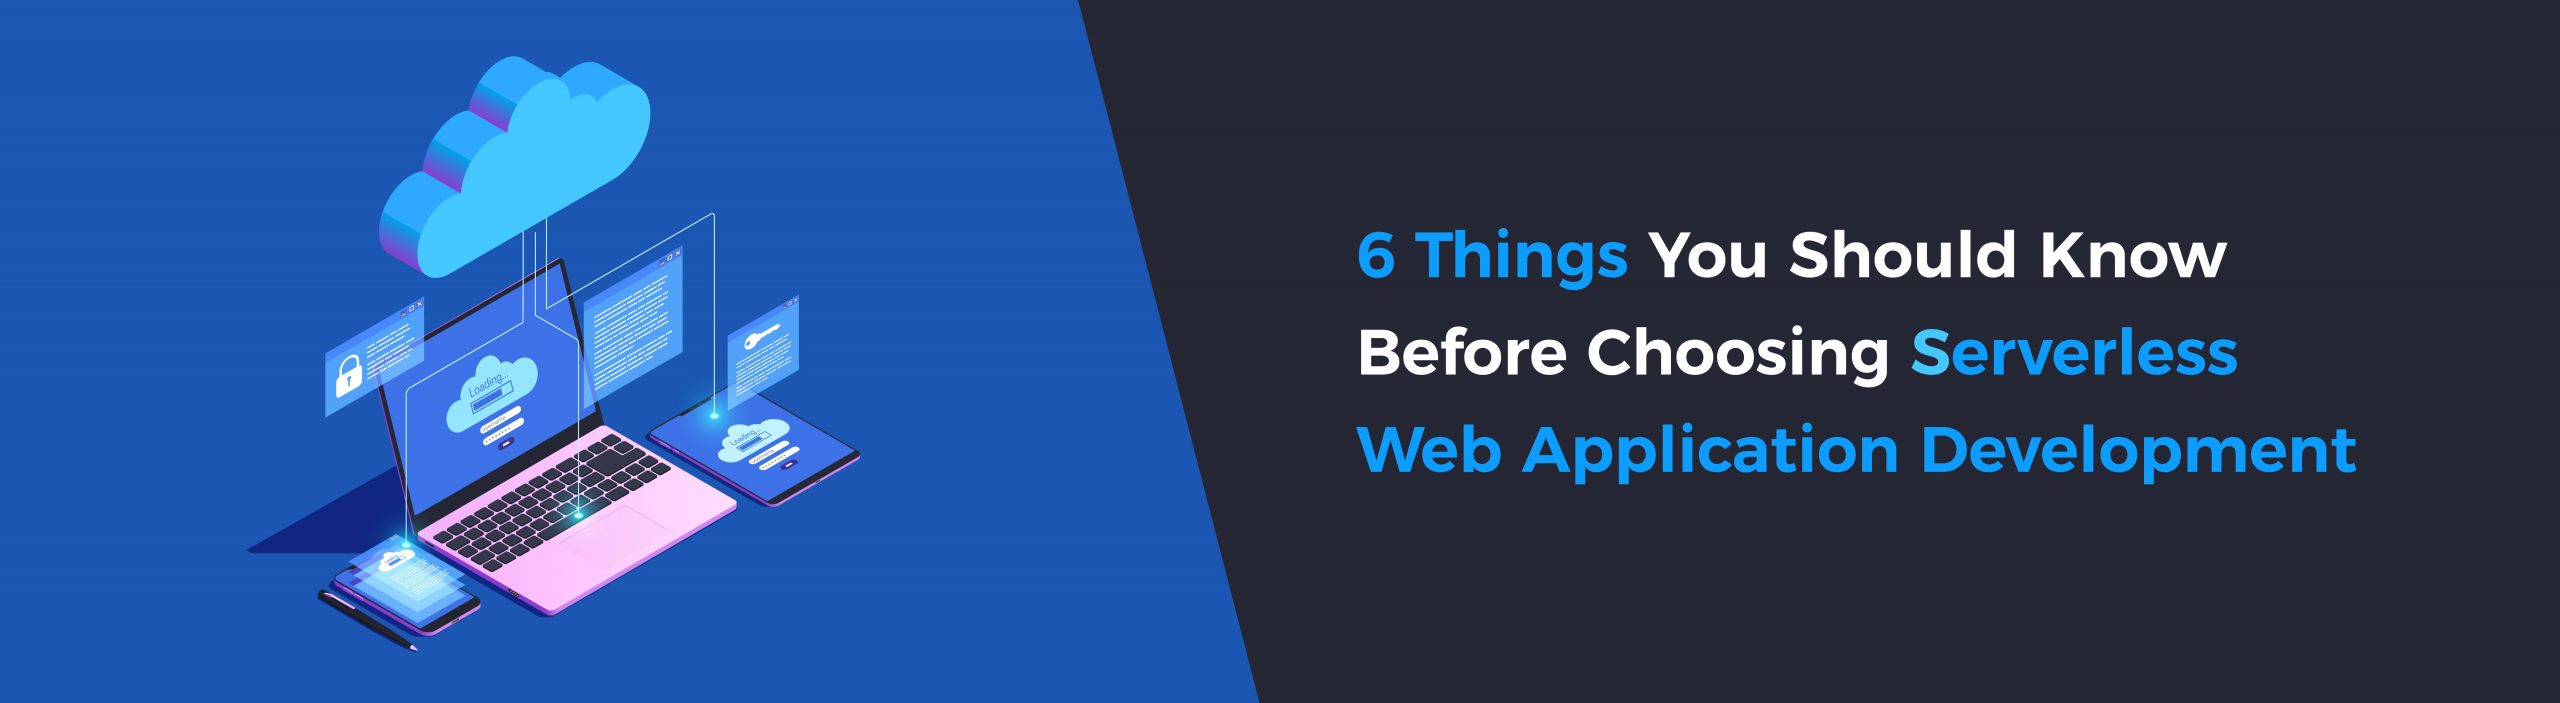 6 Things You Should Know Before Choosing Serverless Web Application Development